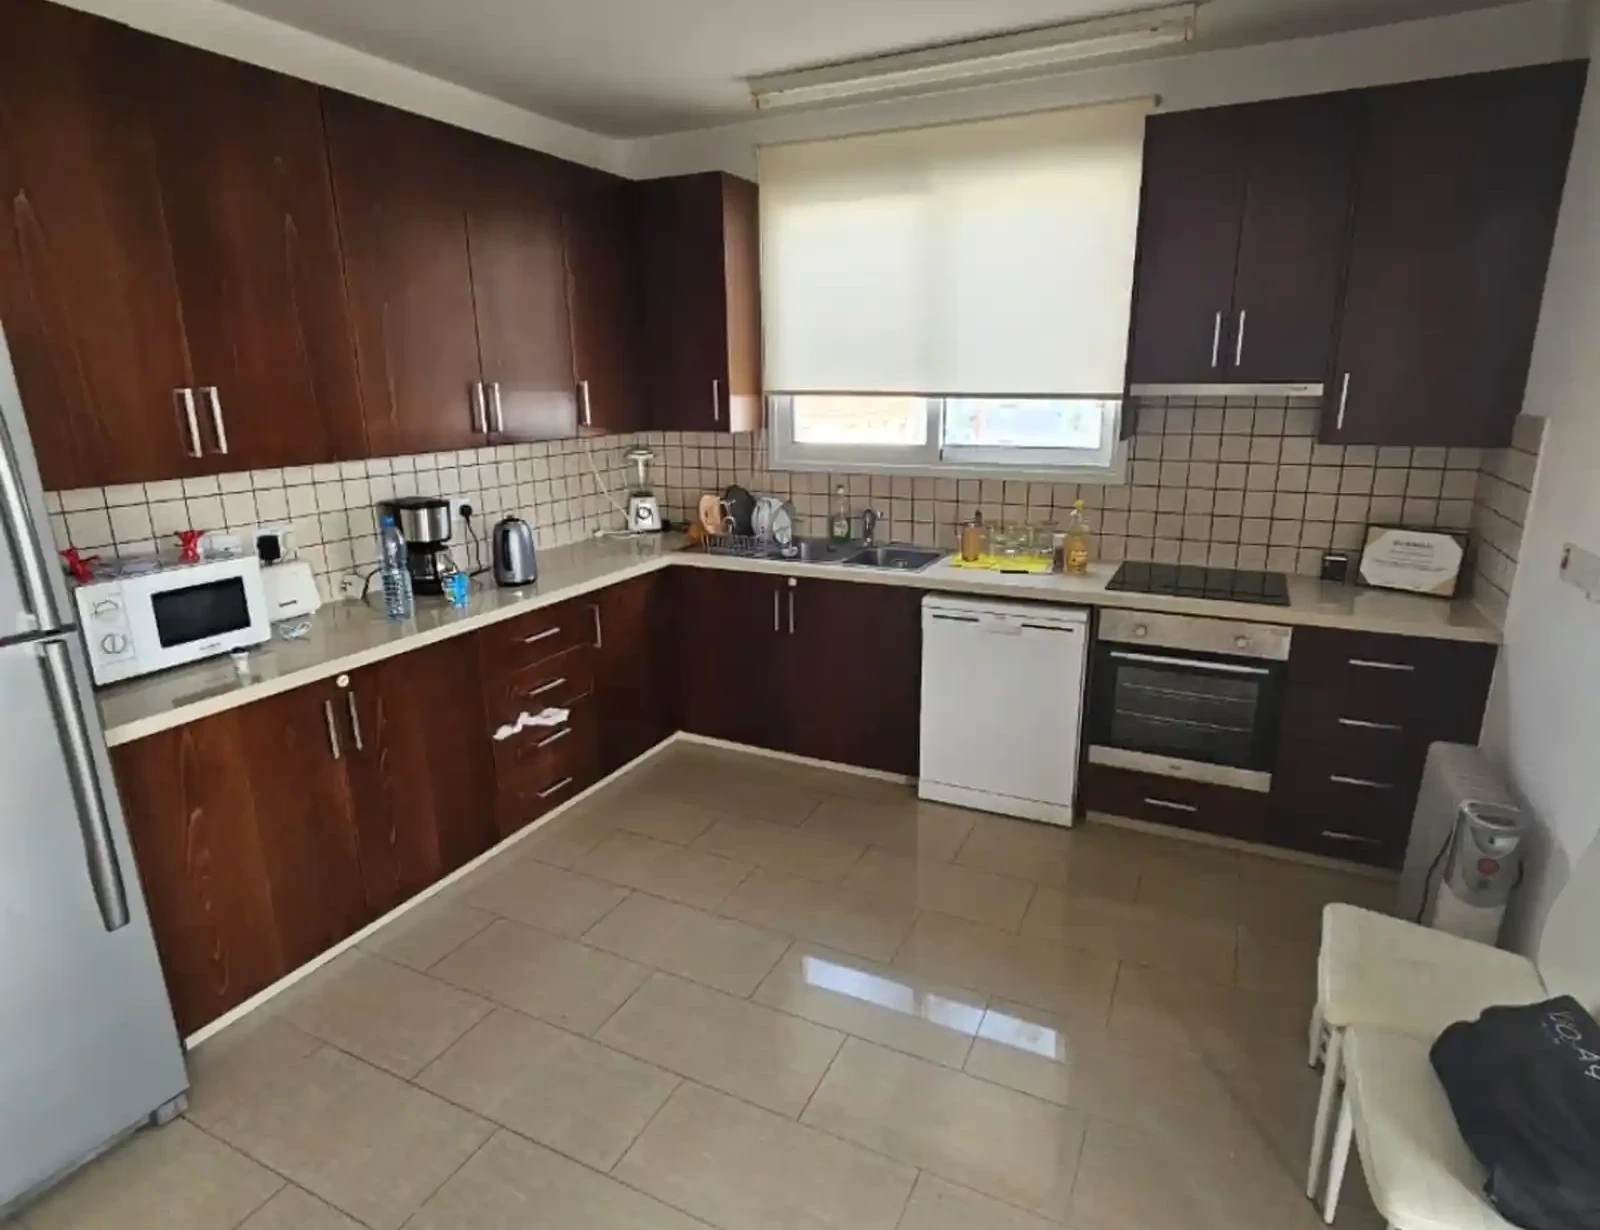 2-bedroom apartment to rent €1.400, image 1